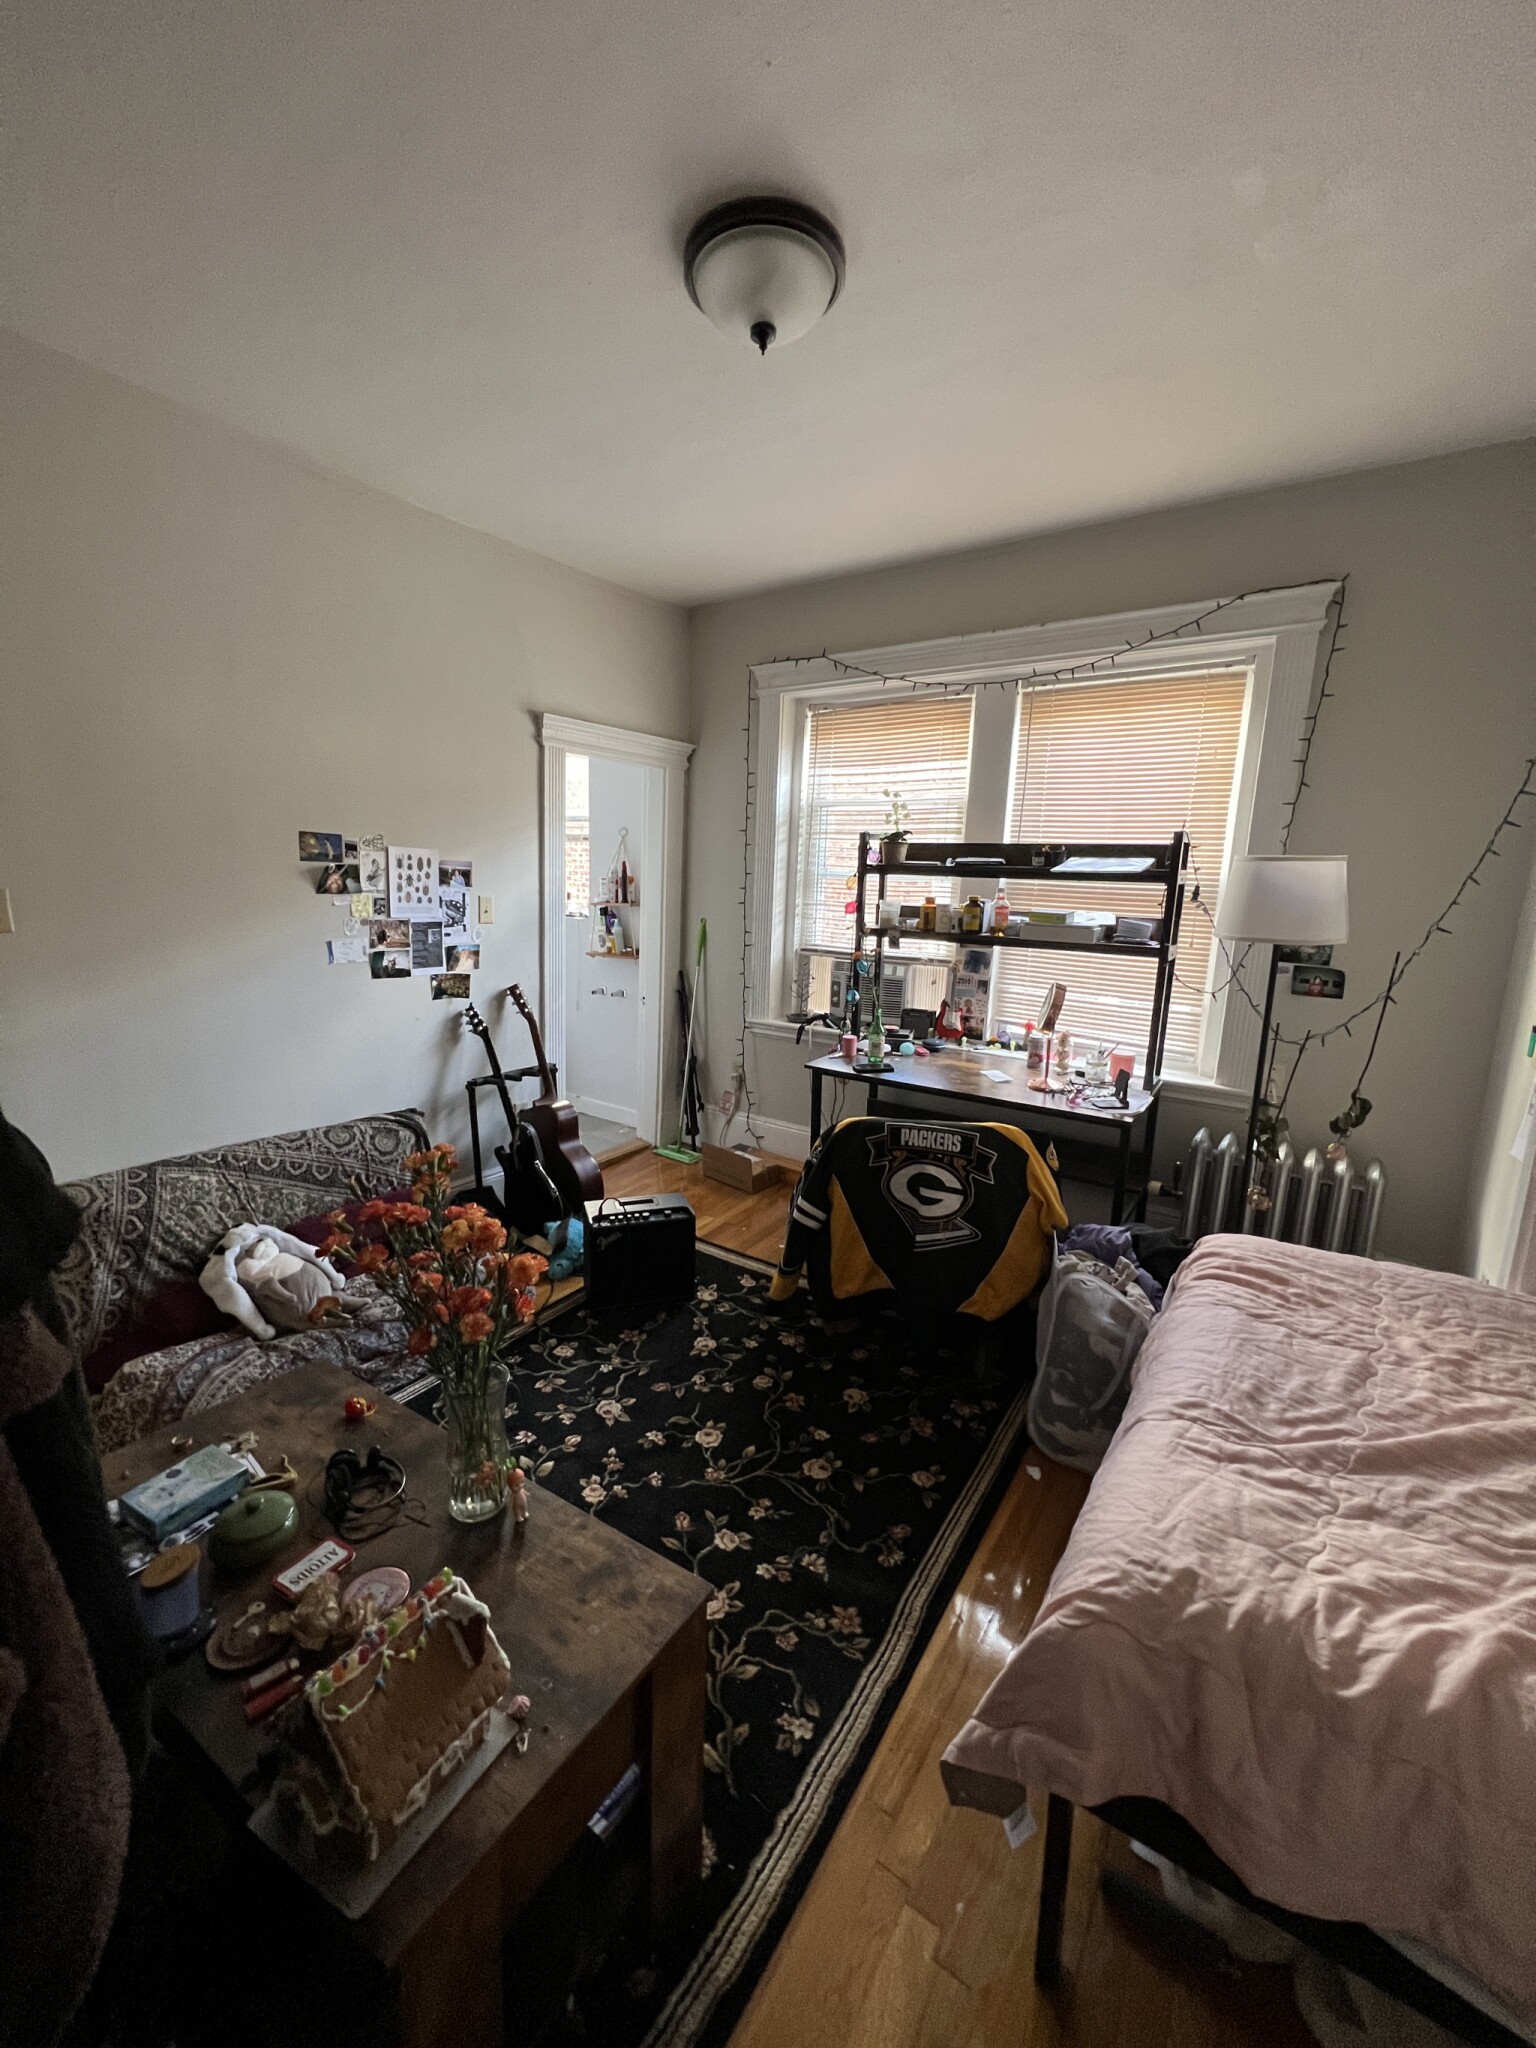 Photos of apartment on Hereford,Boston MA 02115